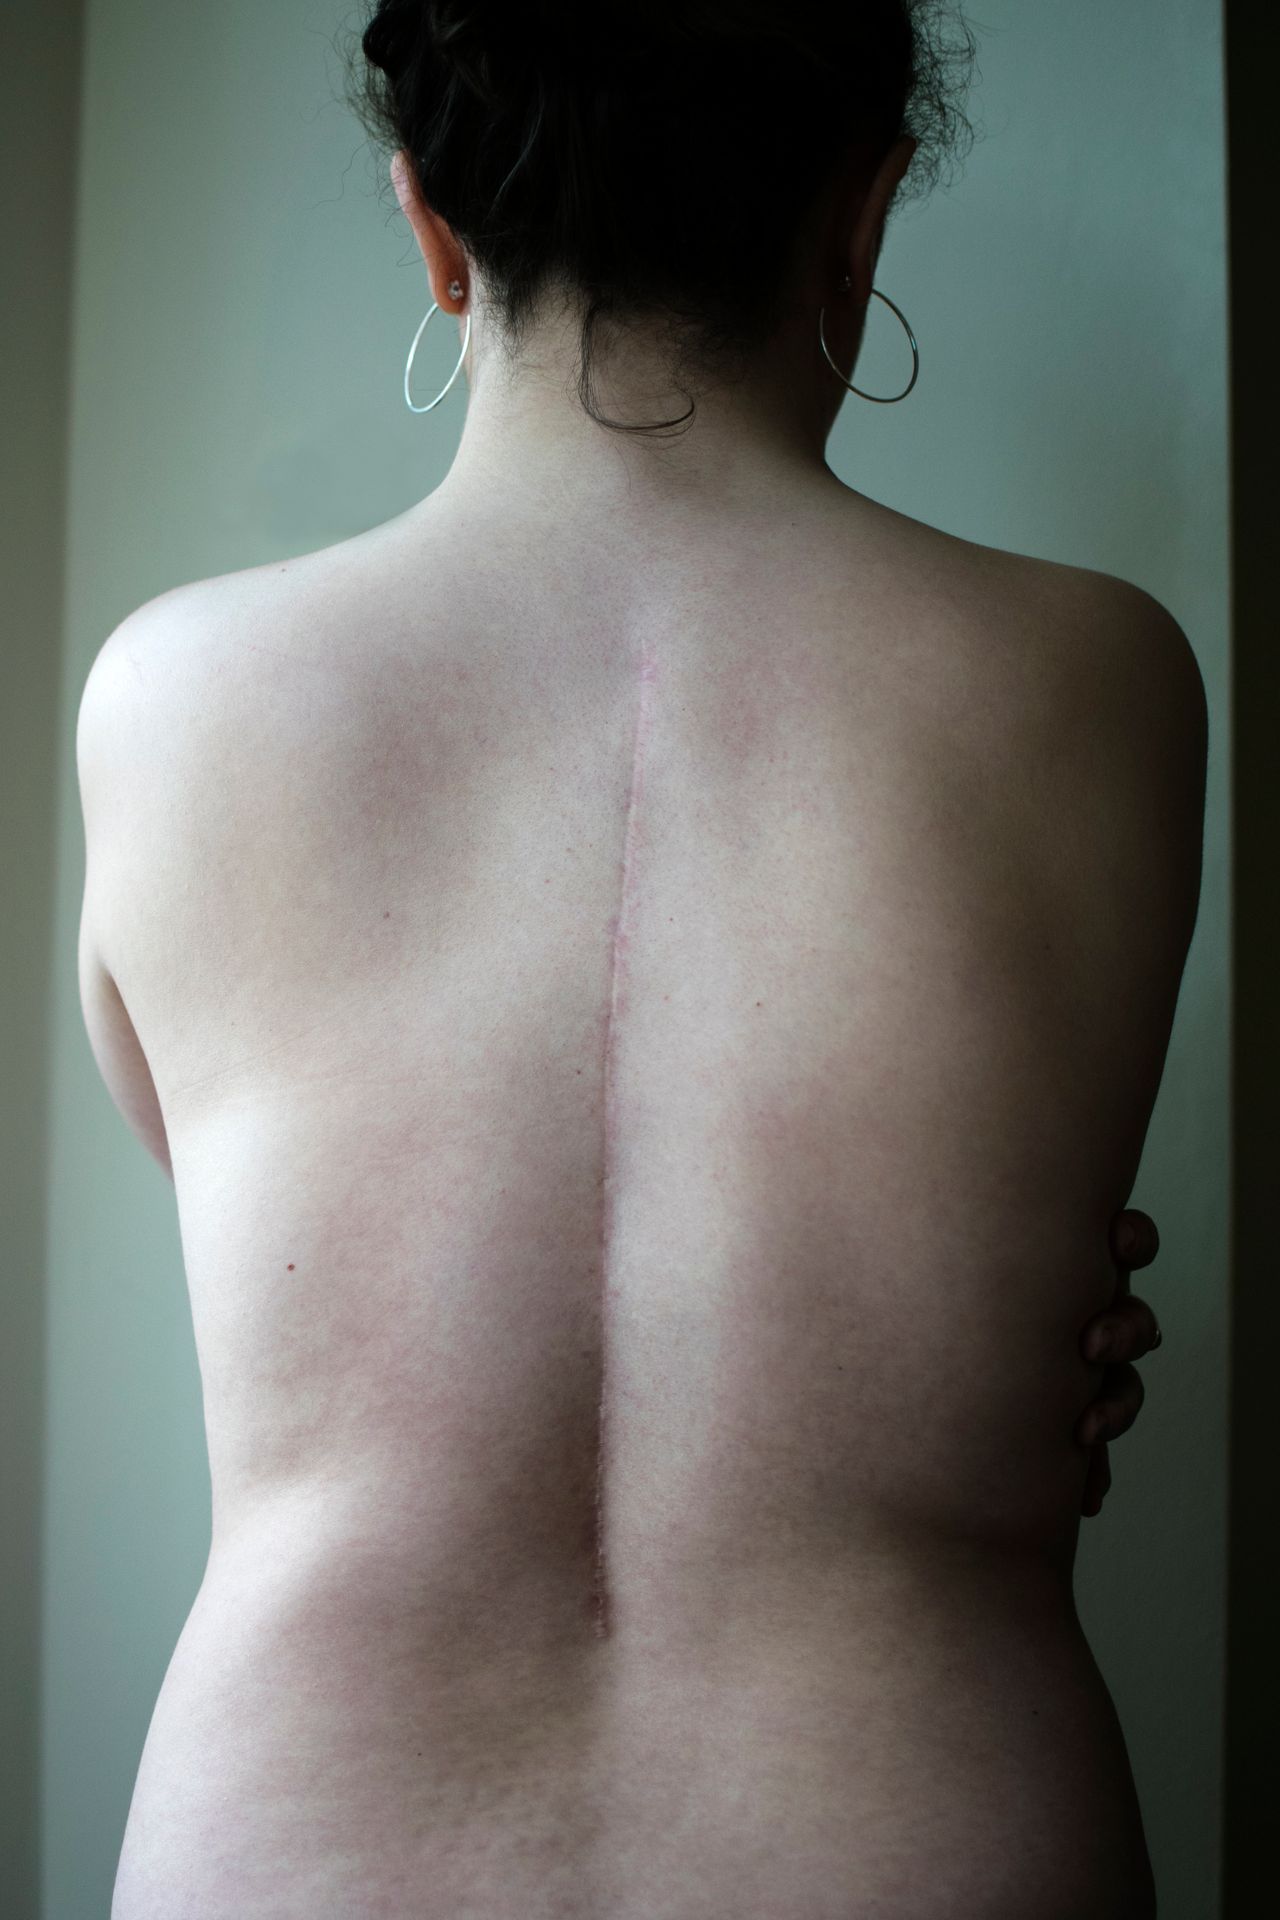 Floss, spinal fusion. February 14, 2011